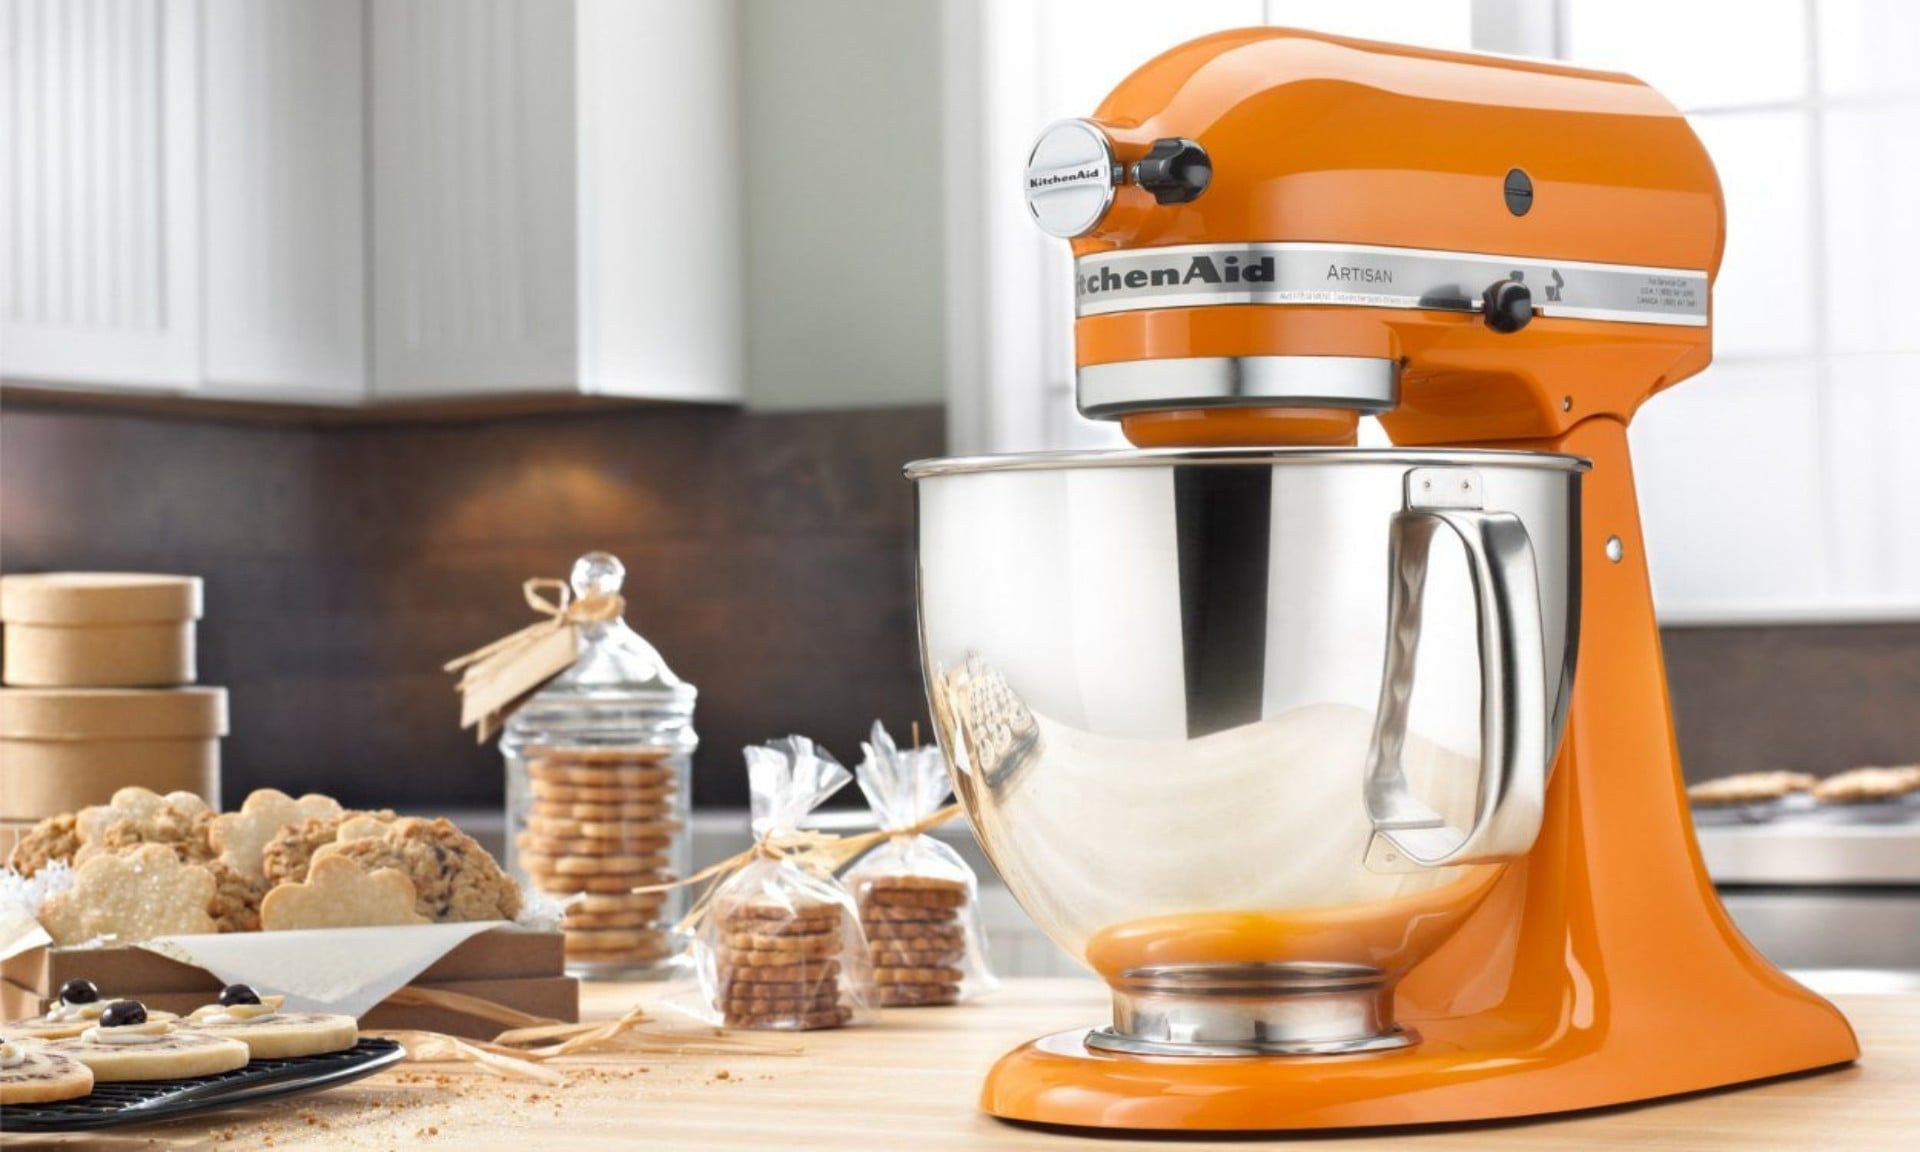 Top 10 KitchenAid Stand Mixers in 2020